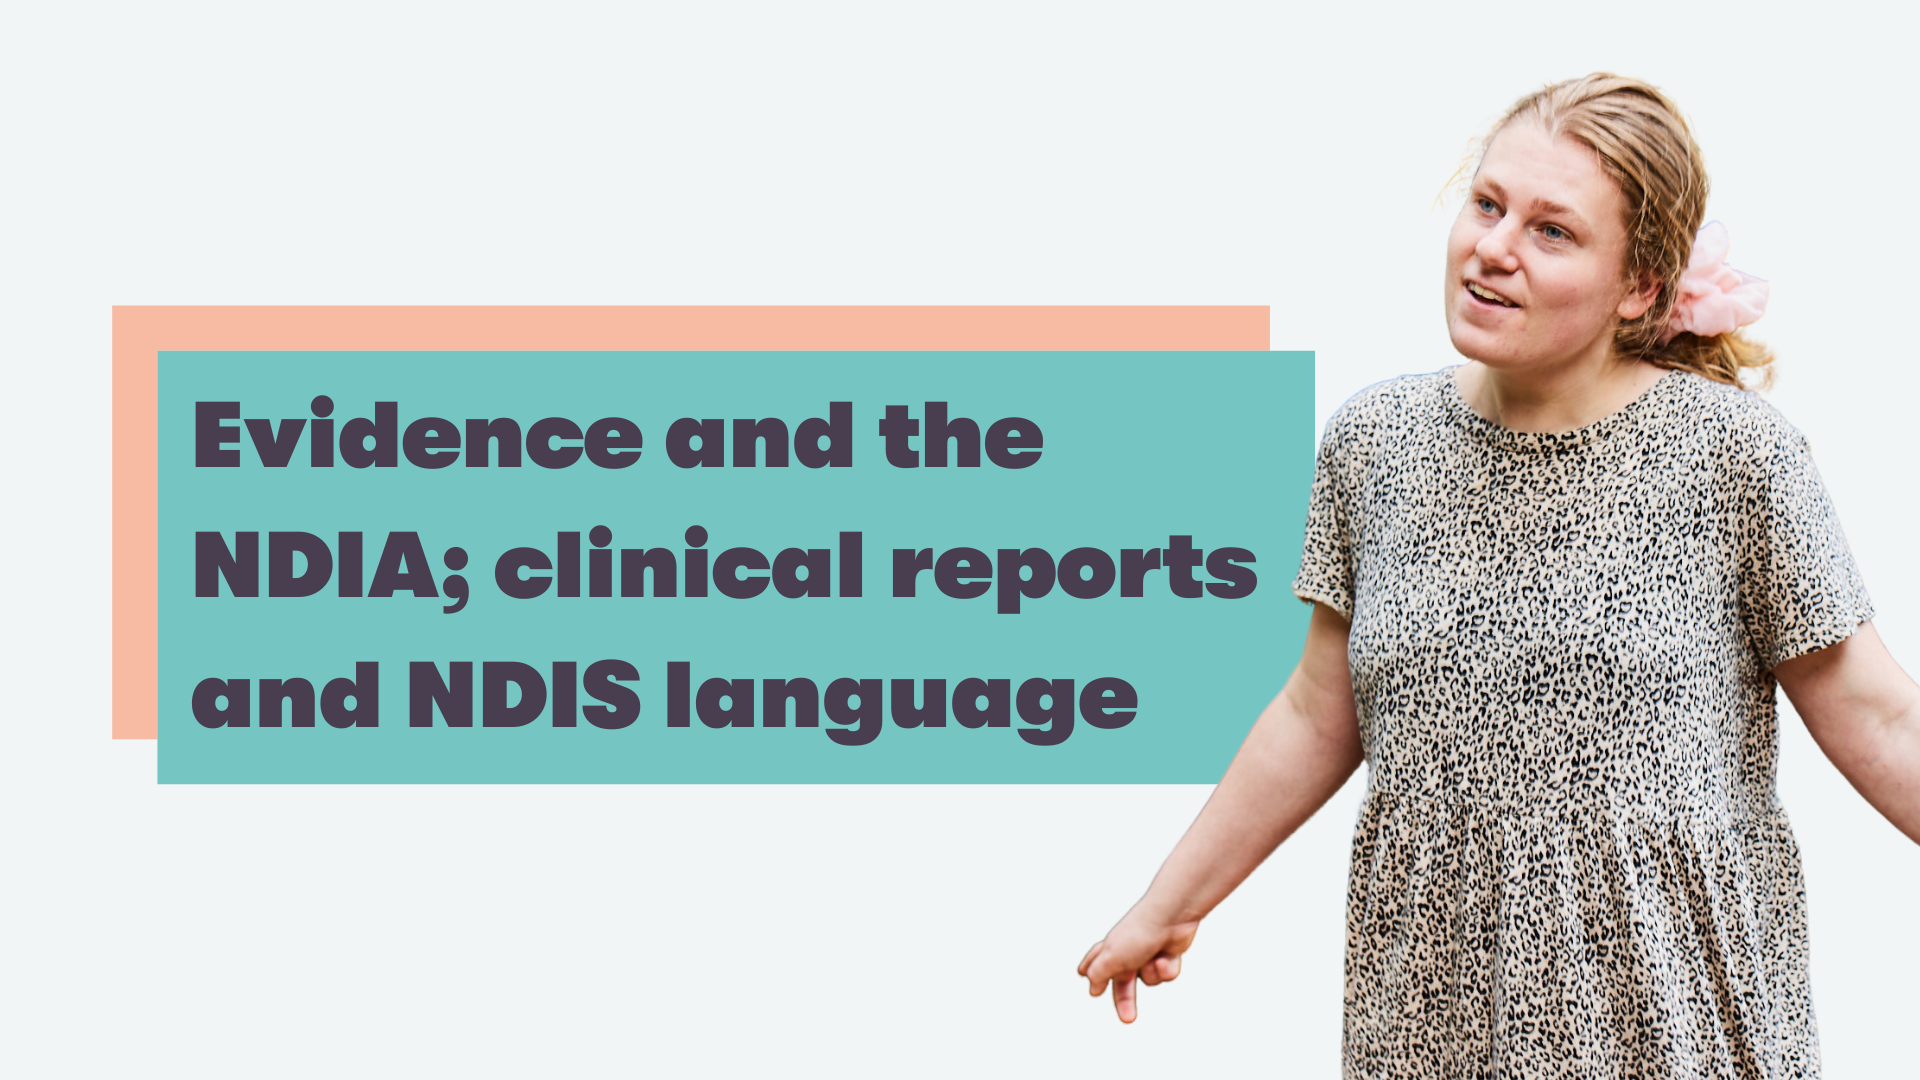 Webinar: Evidence and the NDIA; clinical reports and NDIS language